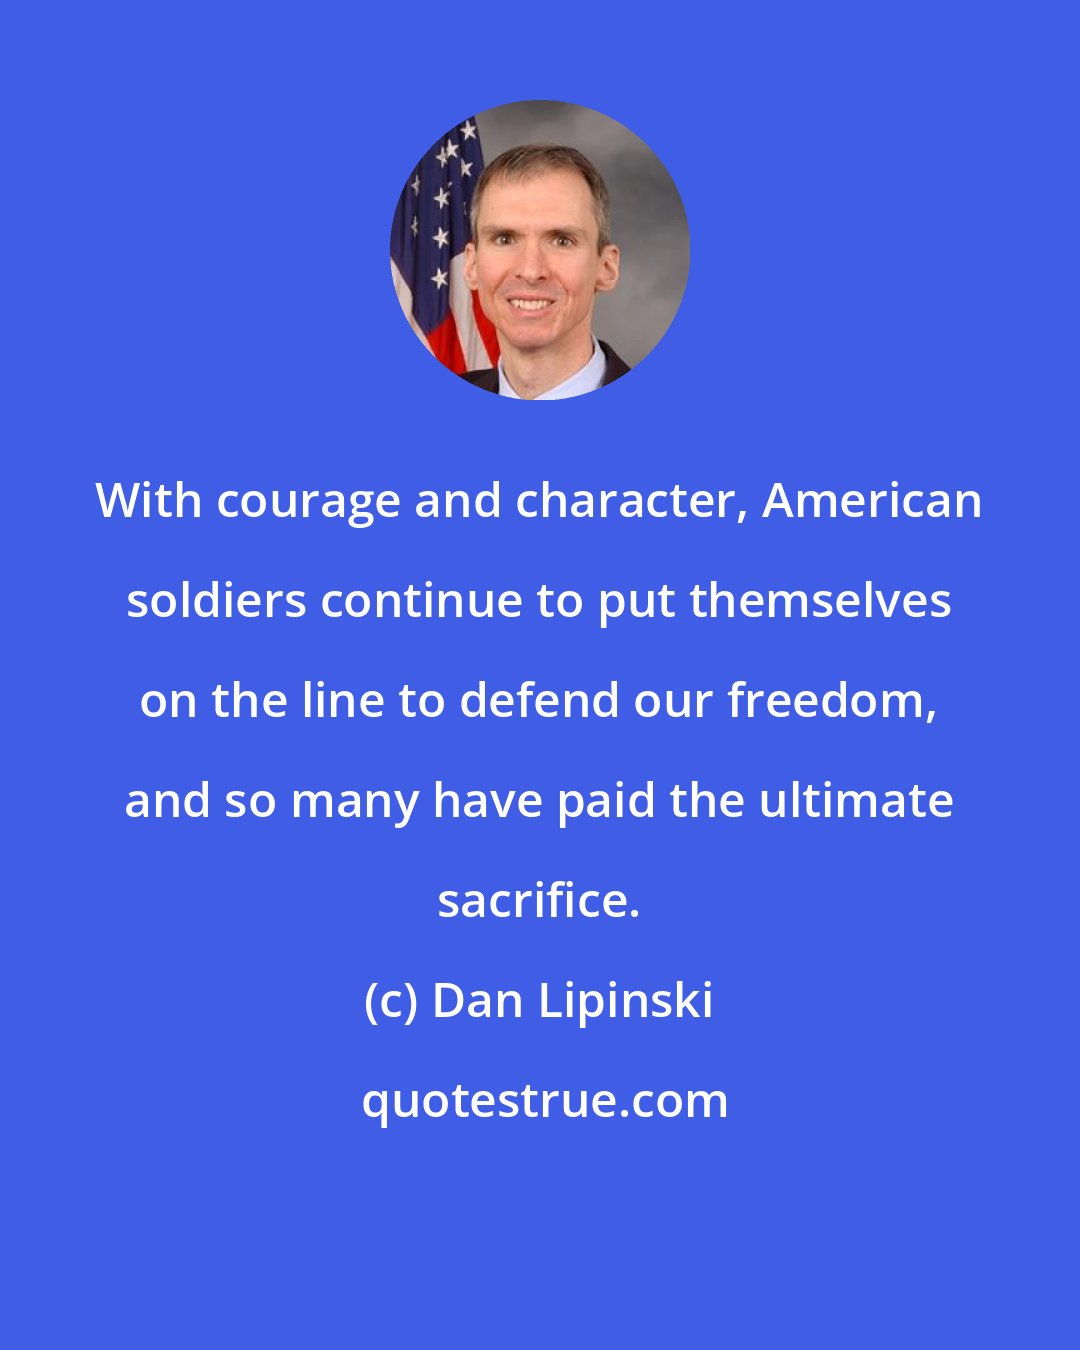 Dan Lipinski: With courage and character, American soldiers continue to put themselves on the line to defend our freedom, and so many have paid the ultimate sacrifice.